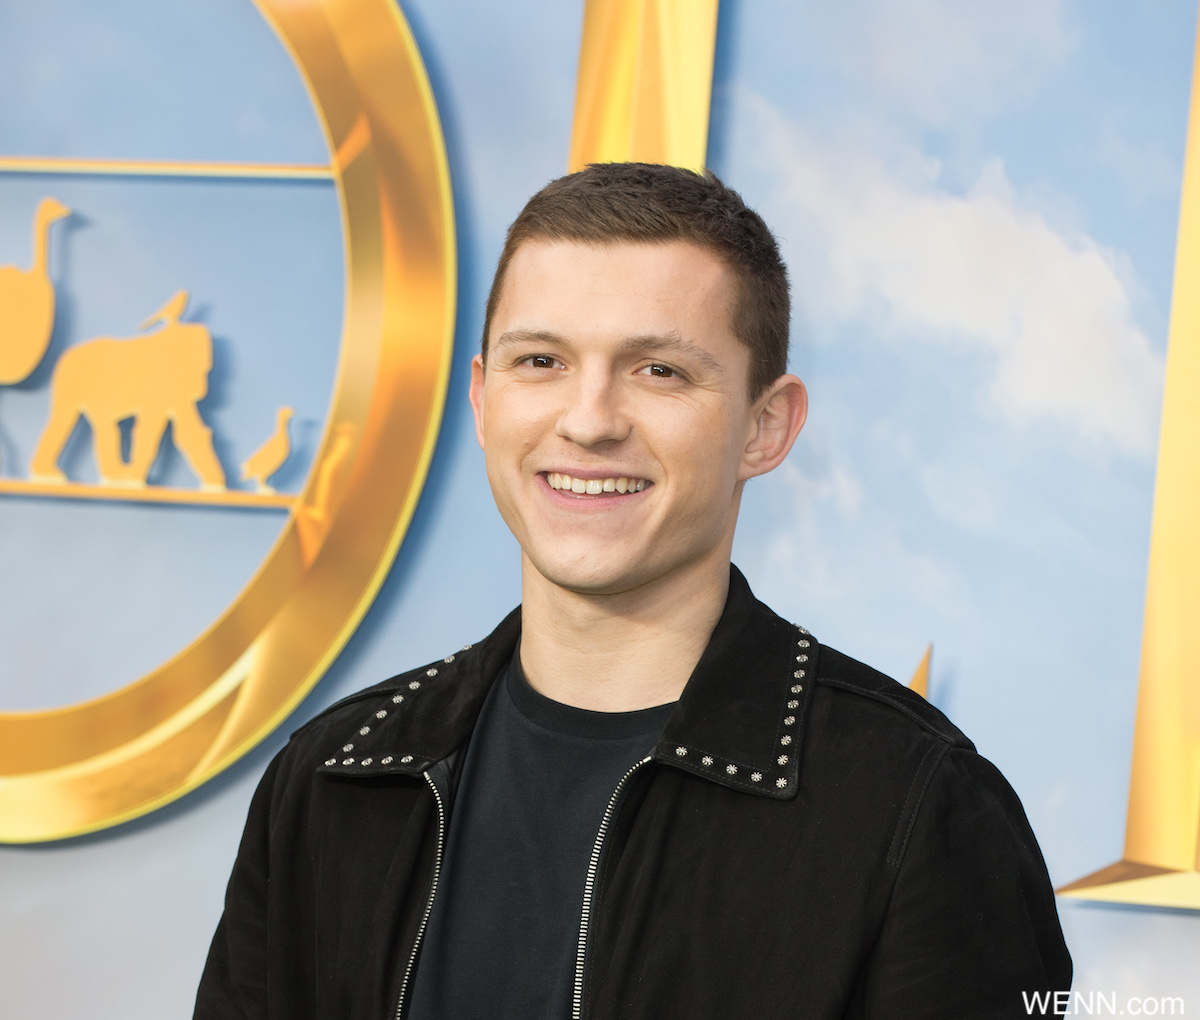 Arriving for the special screening of Dolittle, Leicester Square London. 25.01.20 Featuring: Tom Holland Where: London, United Kingdom When: 25 Jan 2020 Credit: WENN.com